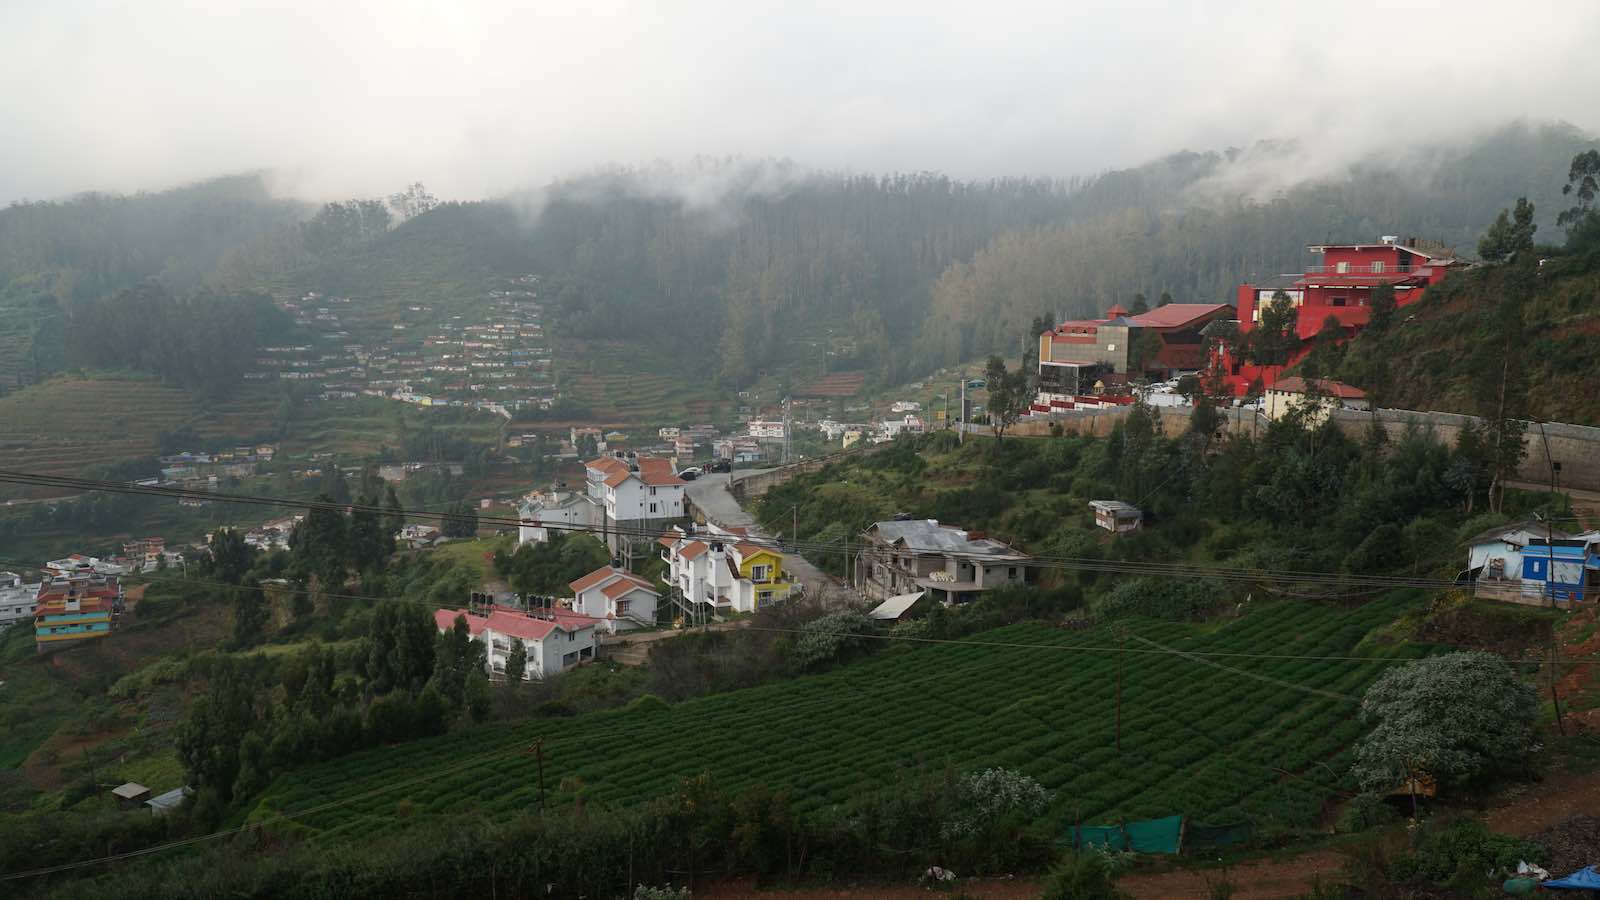 A town deep in the hills of southern India. It was the only place in India I wasn't sweating as soon as I walked outside